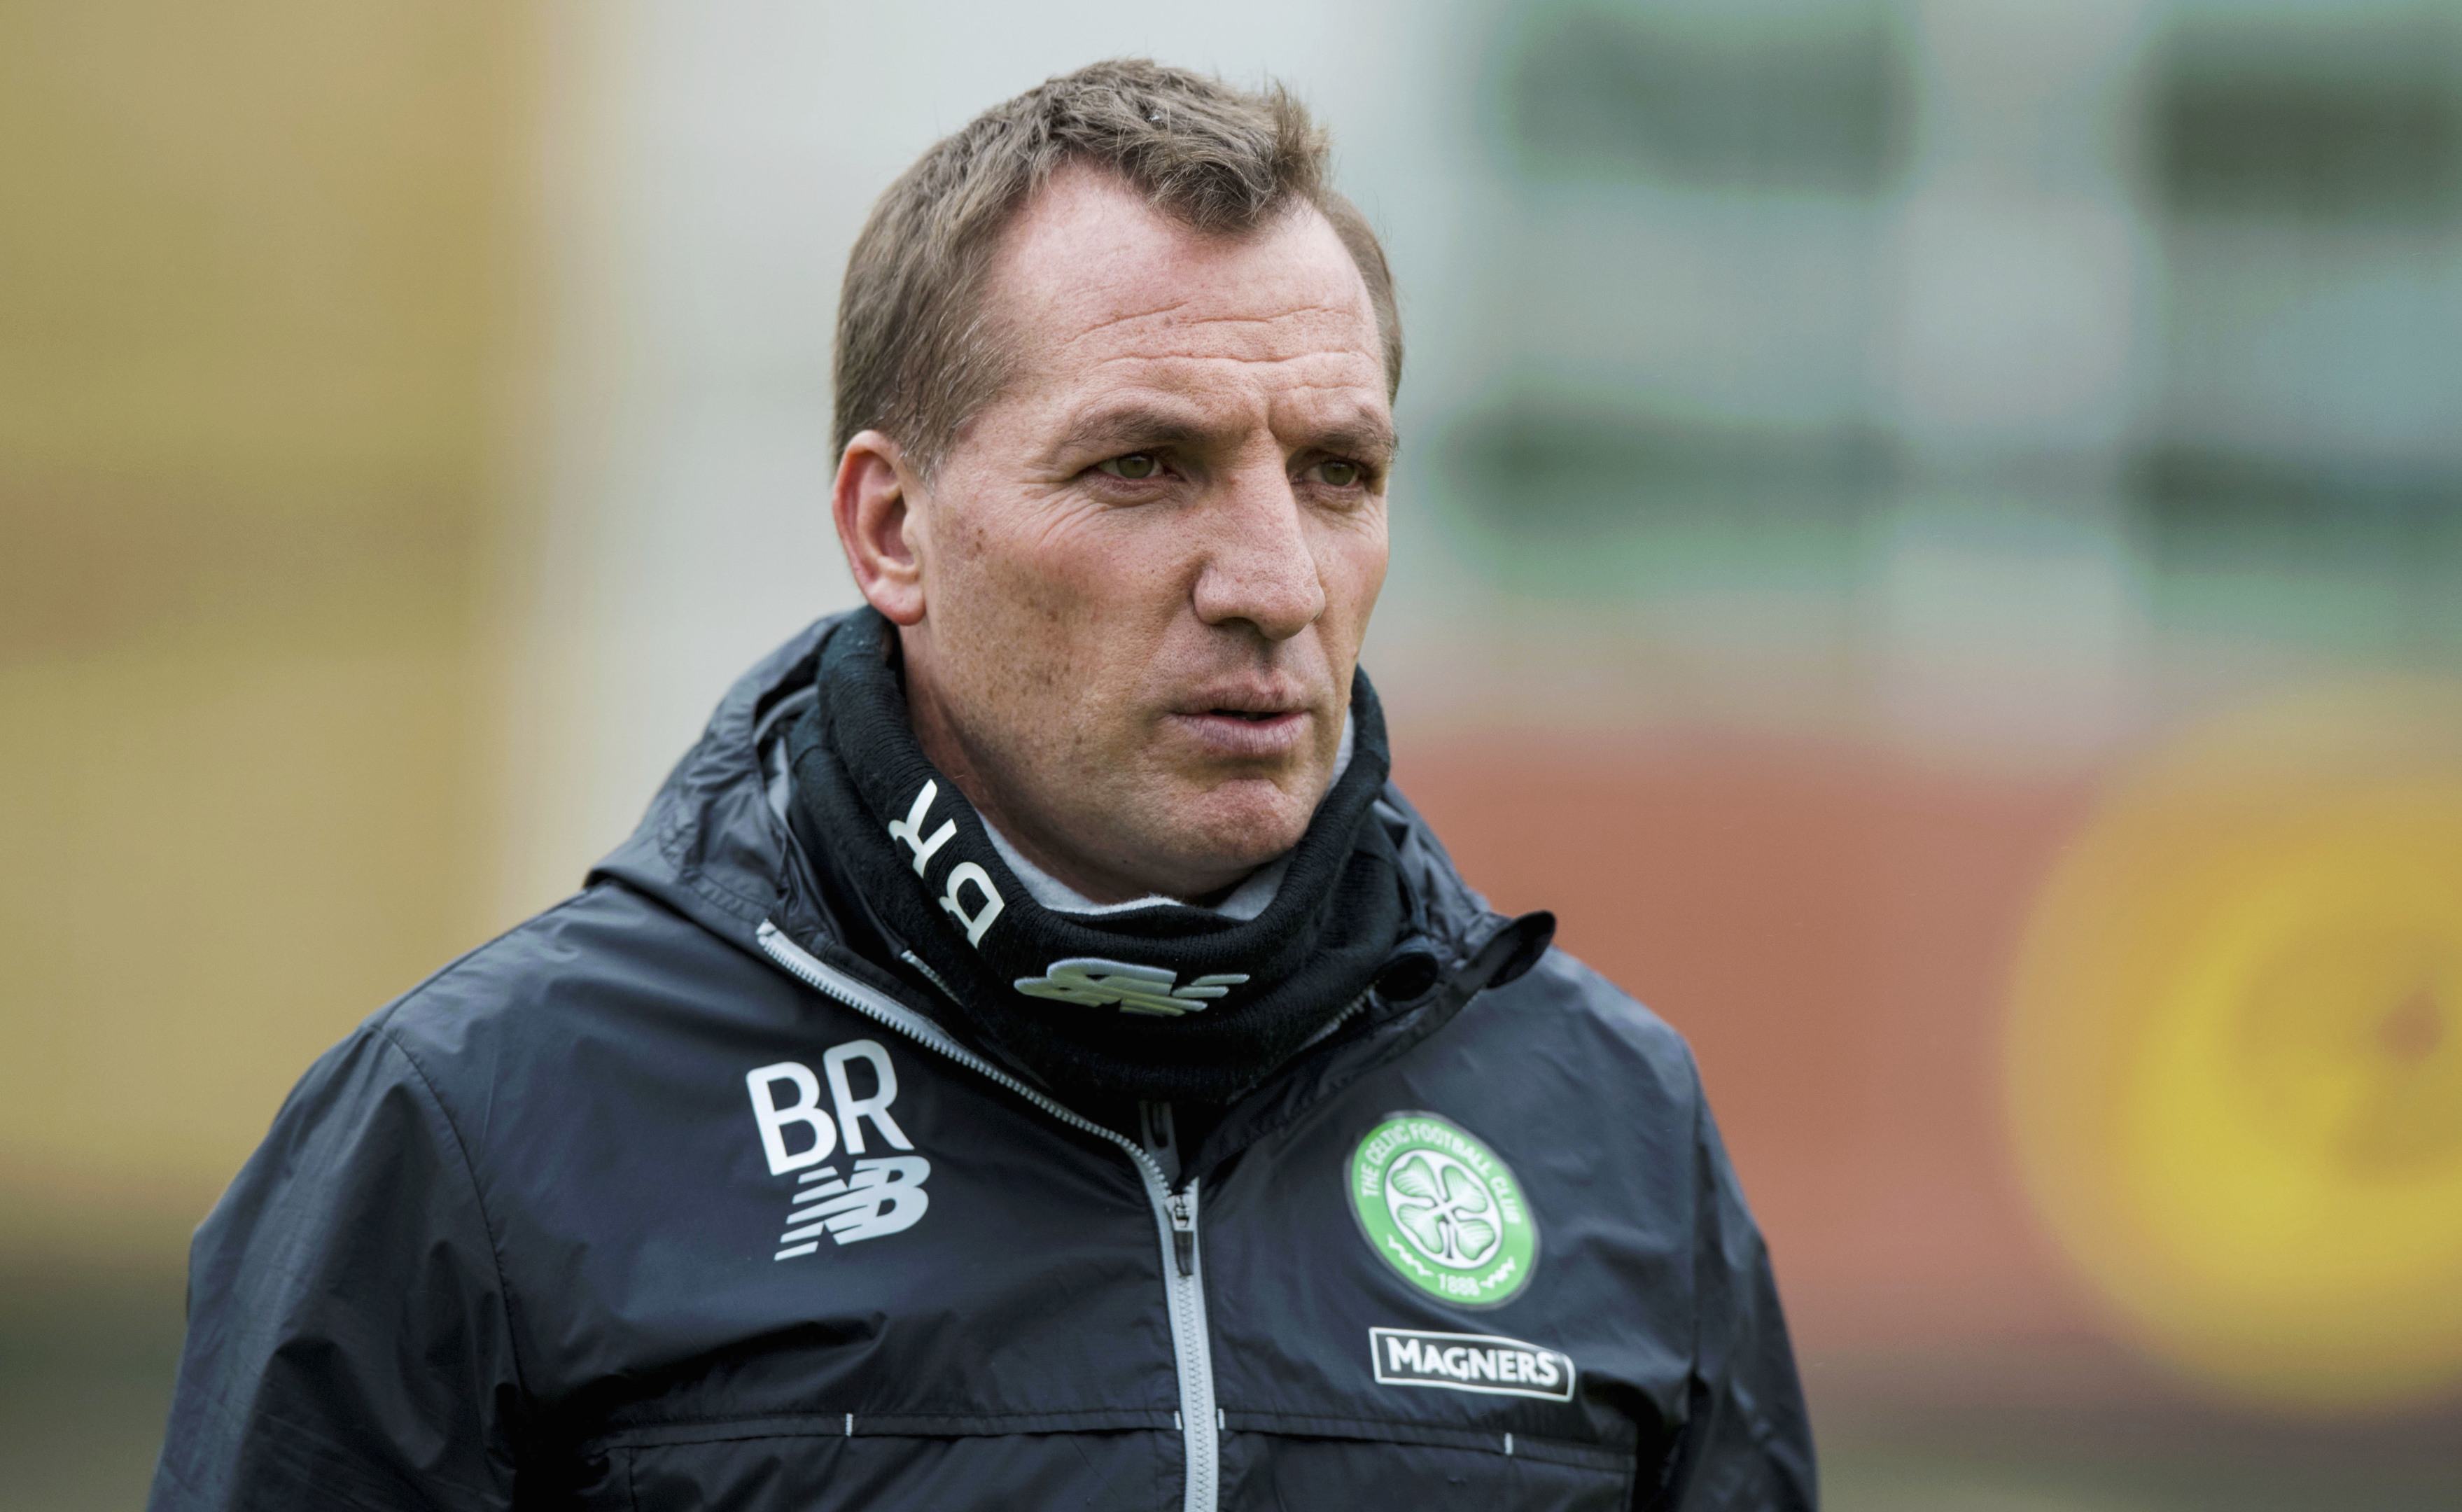 Manager Brendan Rodgers described the "political element" of the banners as unacceptable and admitted he was "saddened" by the display (iStock)